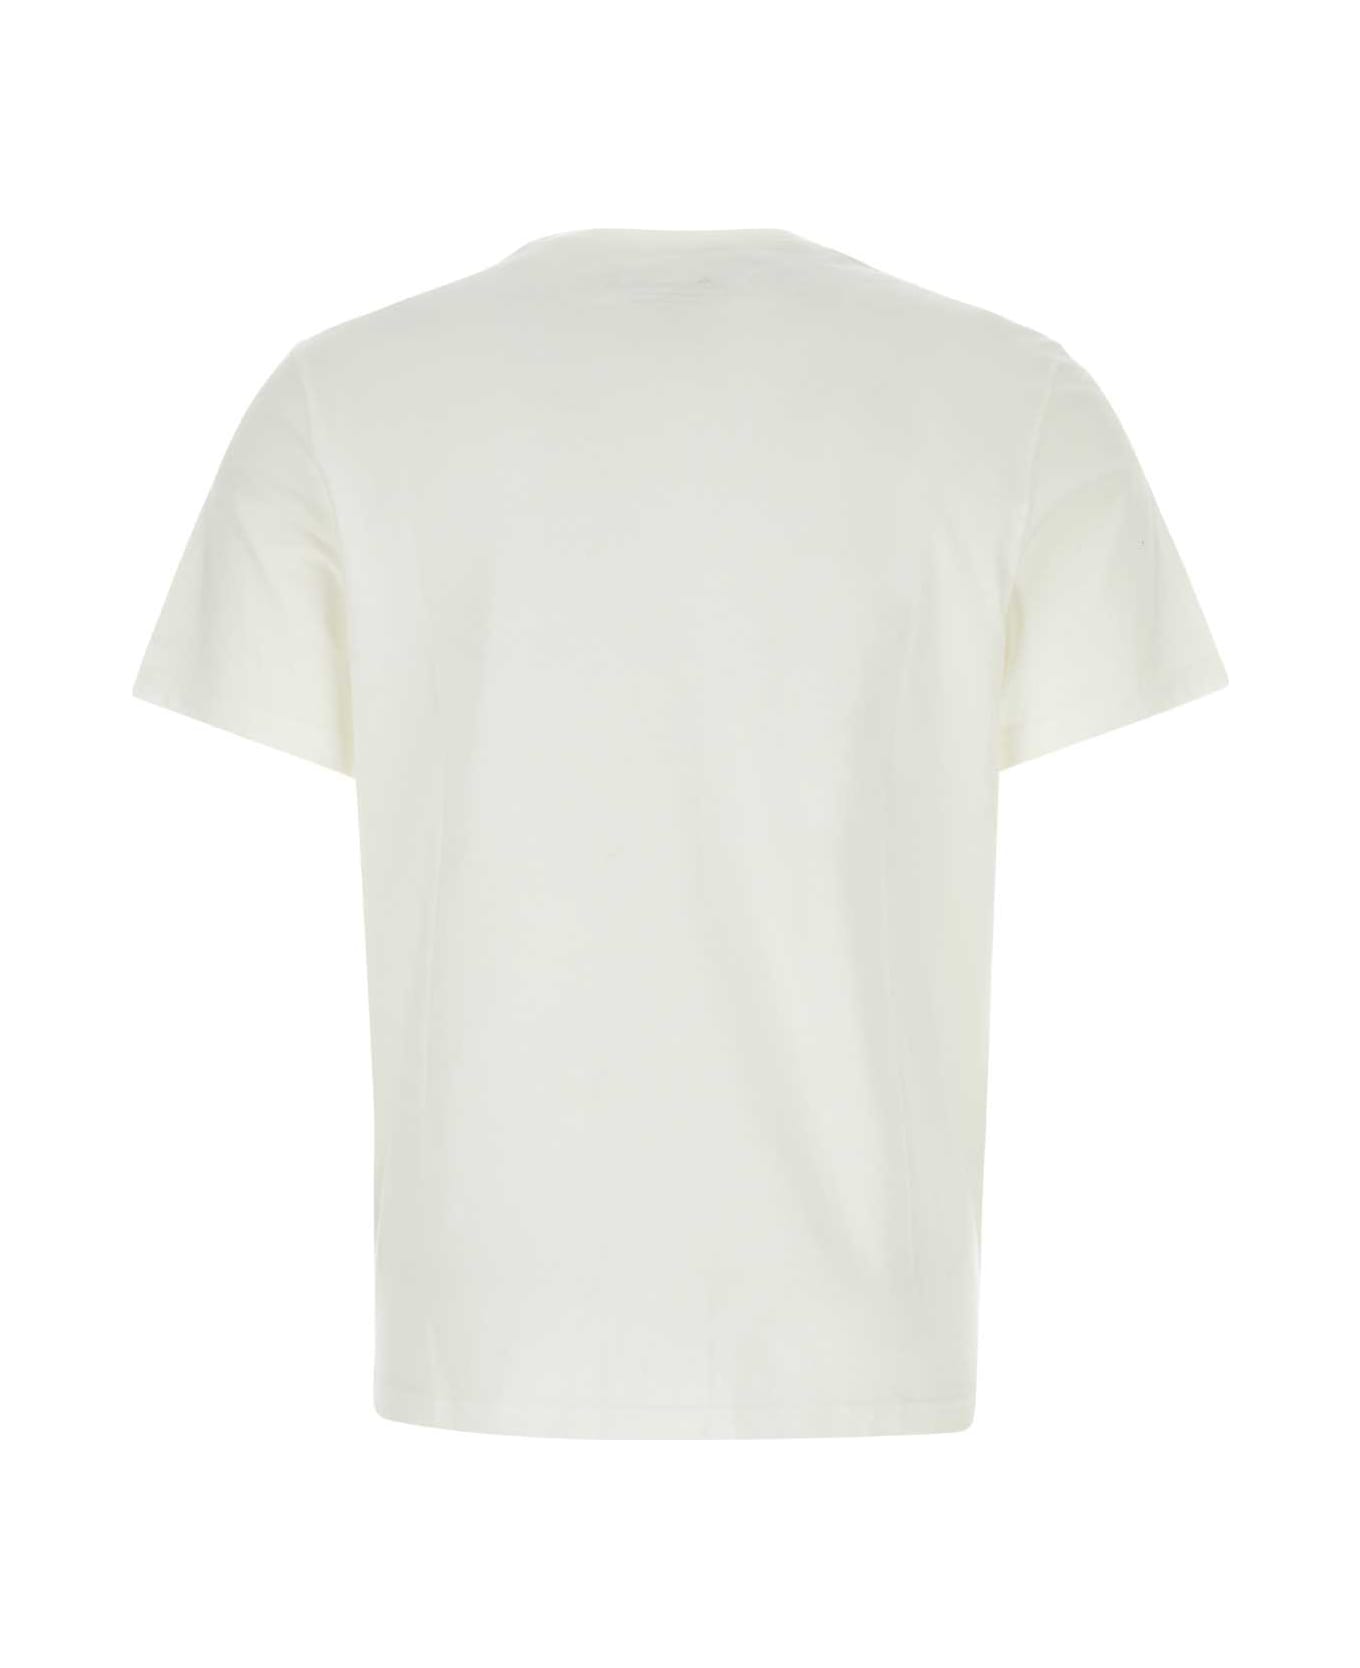 Moose Knuckles White Cotton T-shirt - WHITE